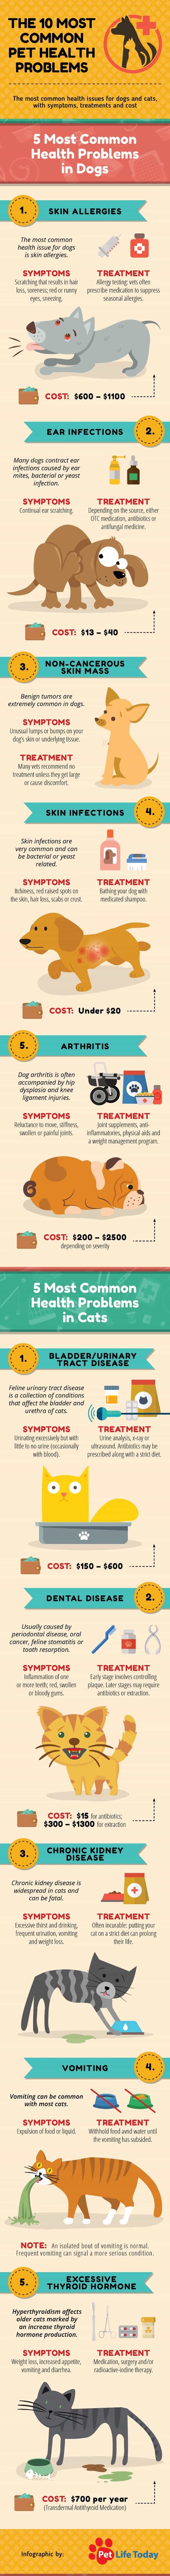 The 10 Most Common Pet Health Problem #Infographic